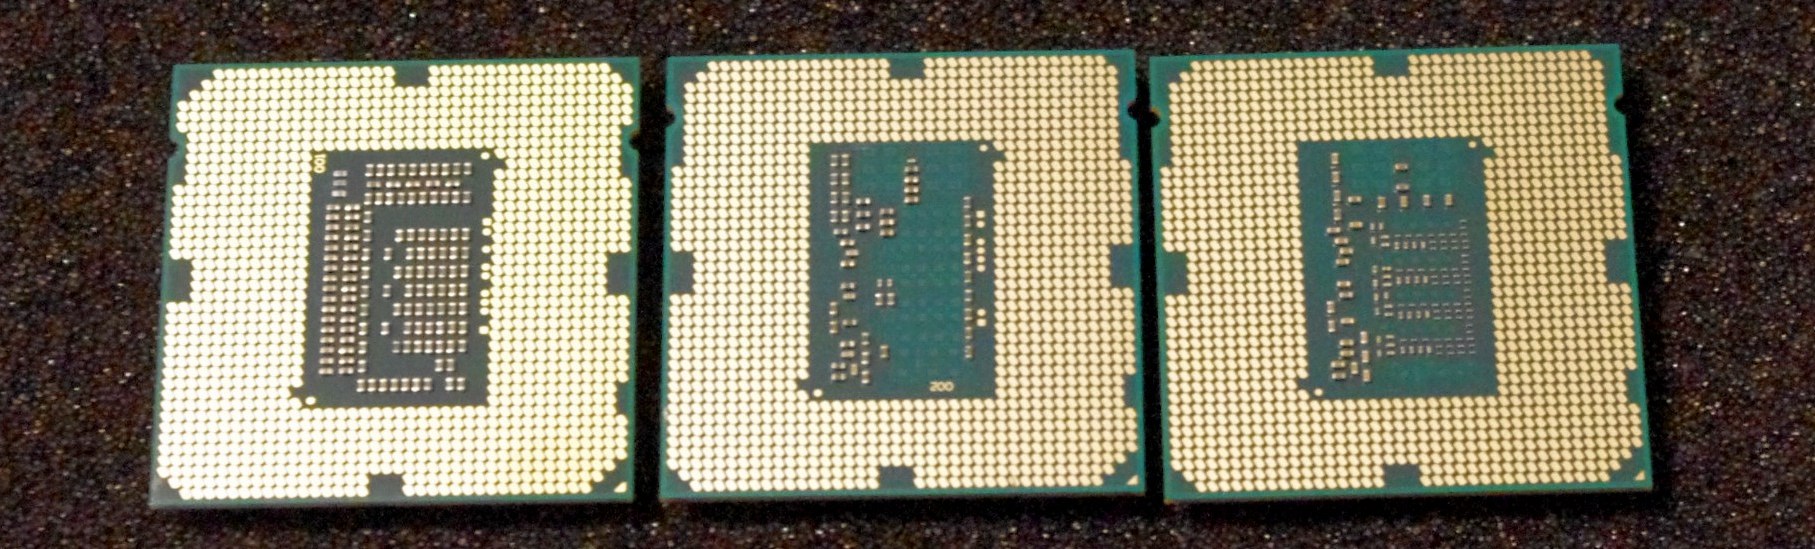 Devil S Canyon Review Intel Core I7 4790k And I5 4690k